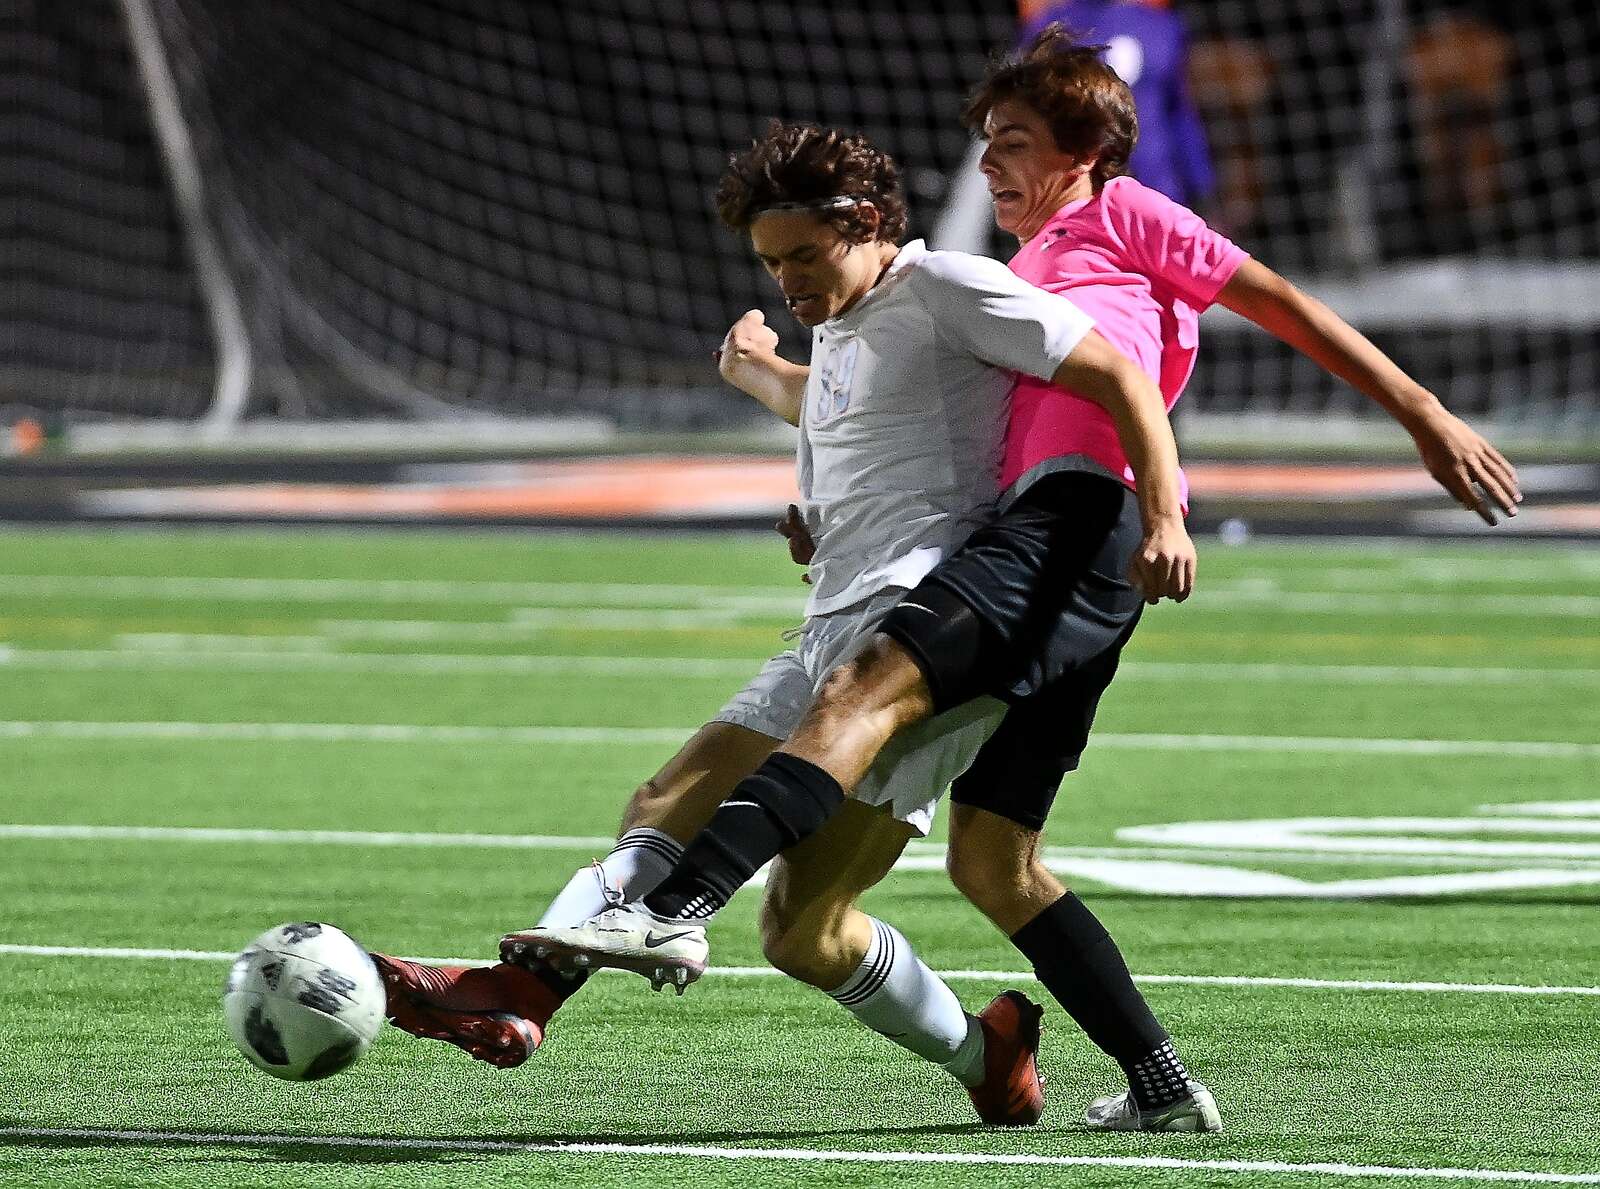 BOYS SOCCER: Crater clinches first league title – Medford News, Weather, Sports, Breaking News